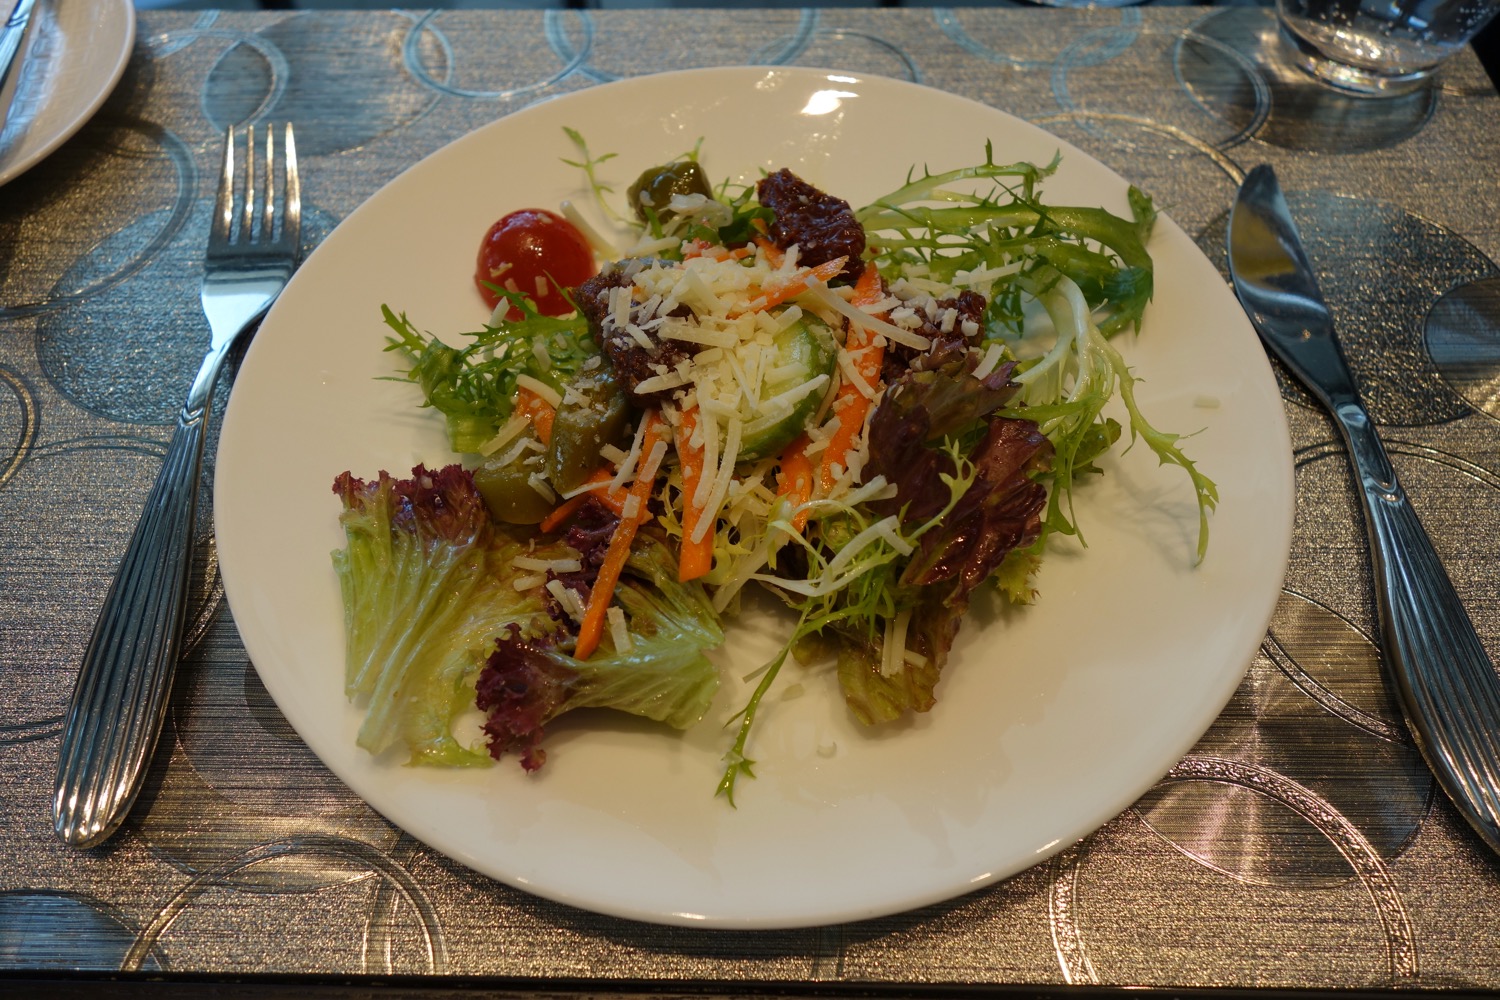 a plate of salad with a fork and knife